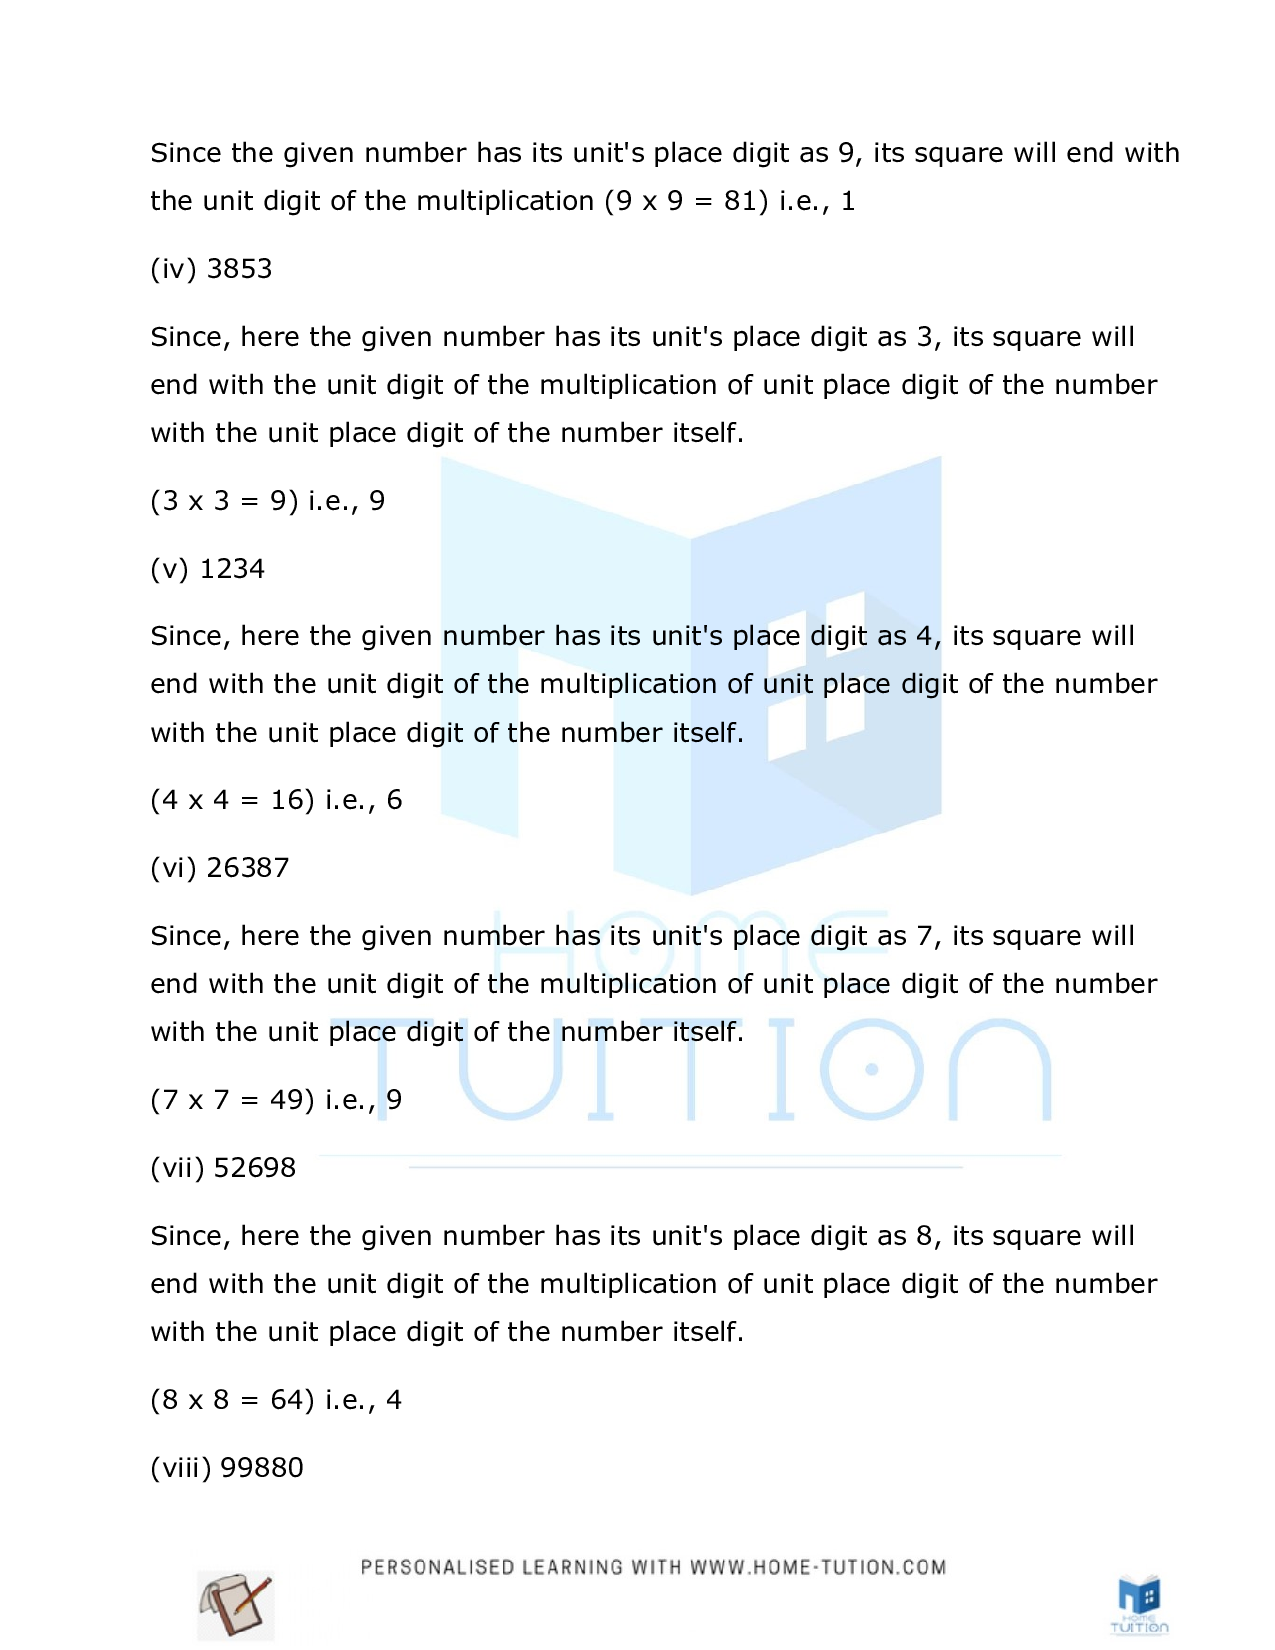 Class 8 Maths Chapter 6 Squares and Square Roots